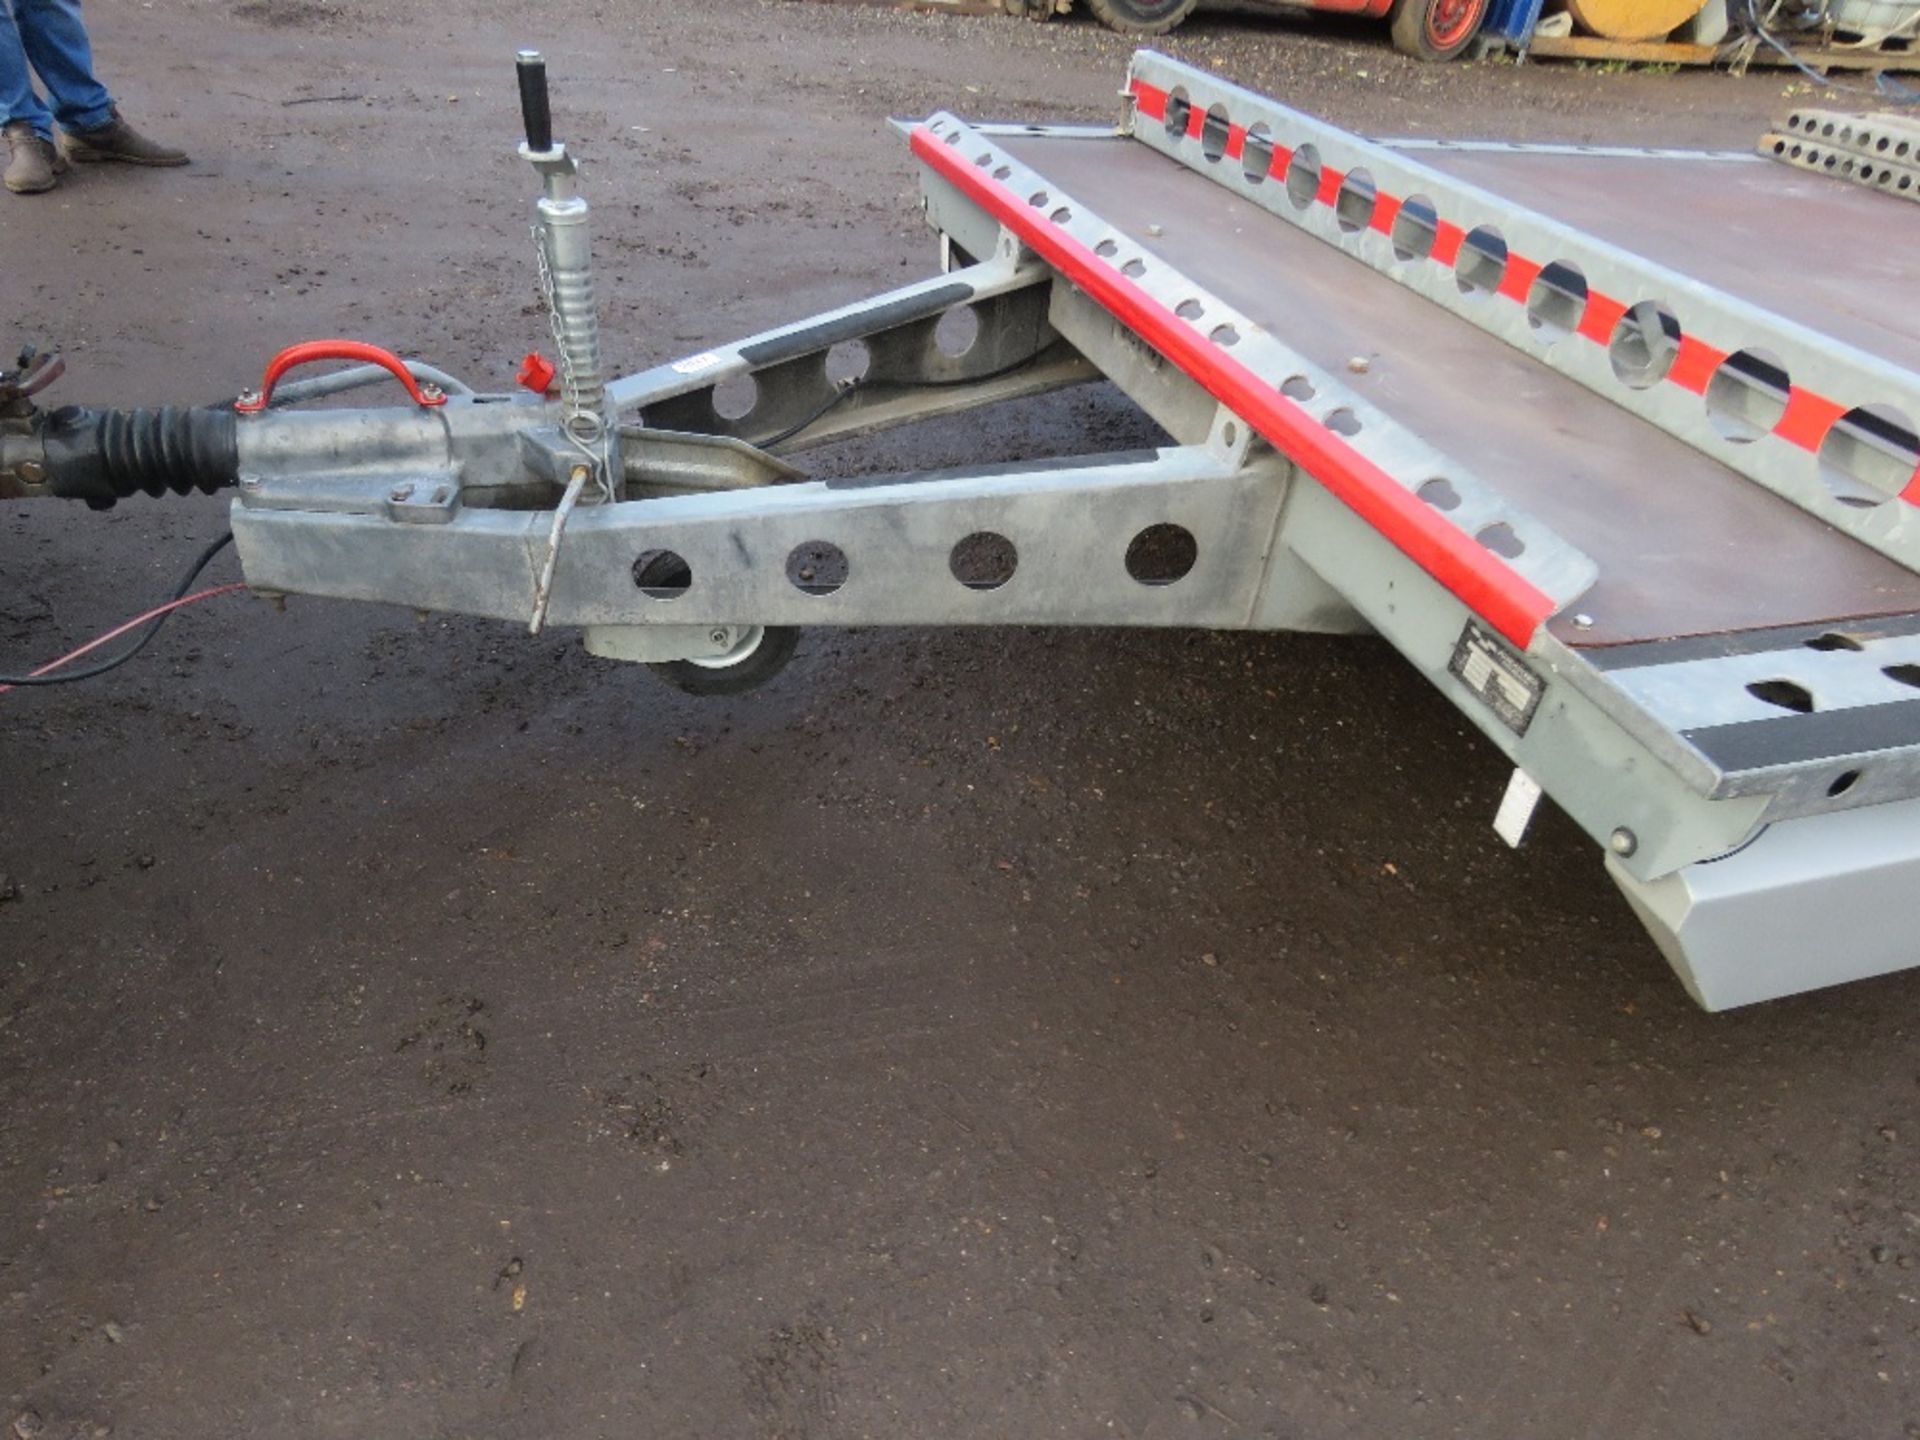 PLOWMAN PCT41 TWIN AXLED BEAVERTAIL TRAILER. 13FT X 7FT BED APPROX WITH RAMPS AS SHOWN. 3OOOKG RATED - Image 7 of 8